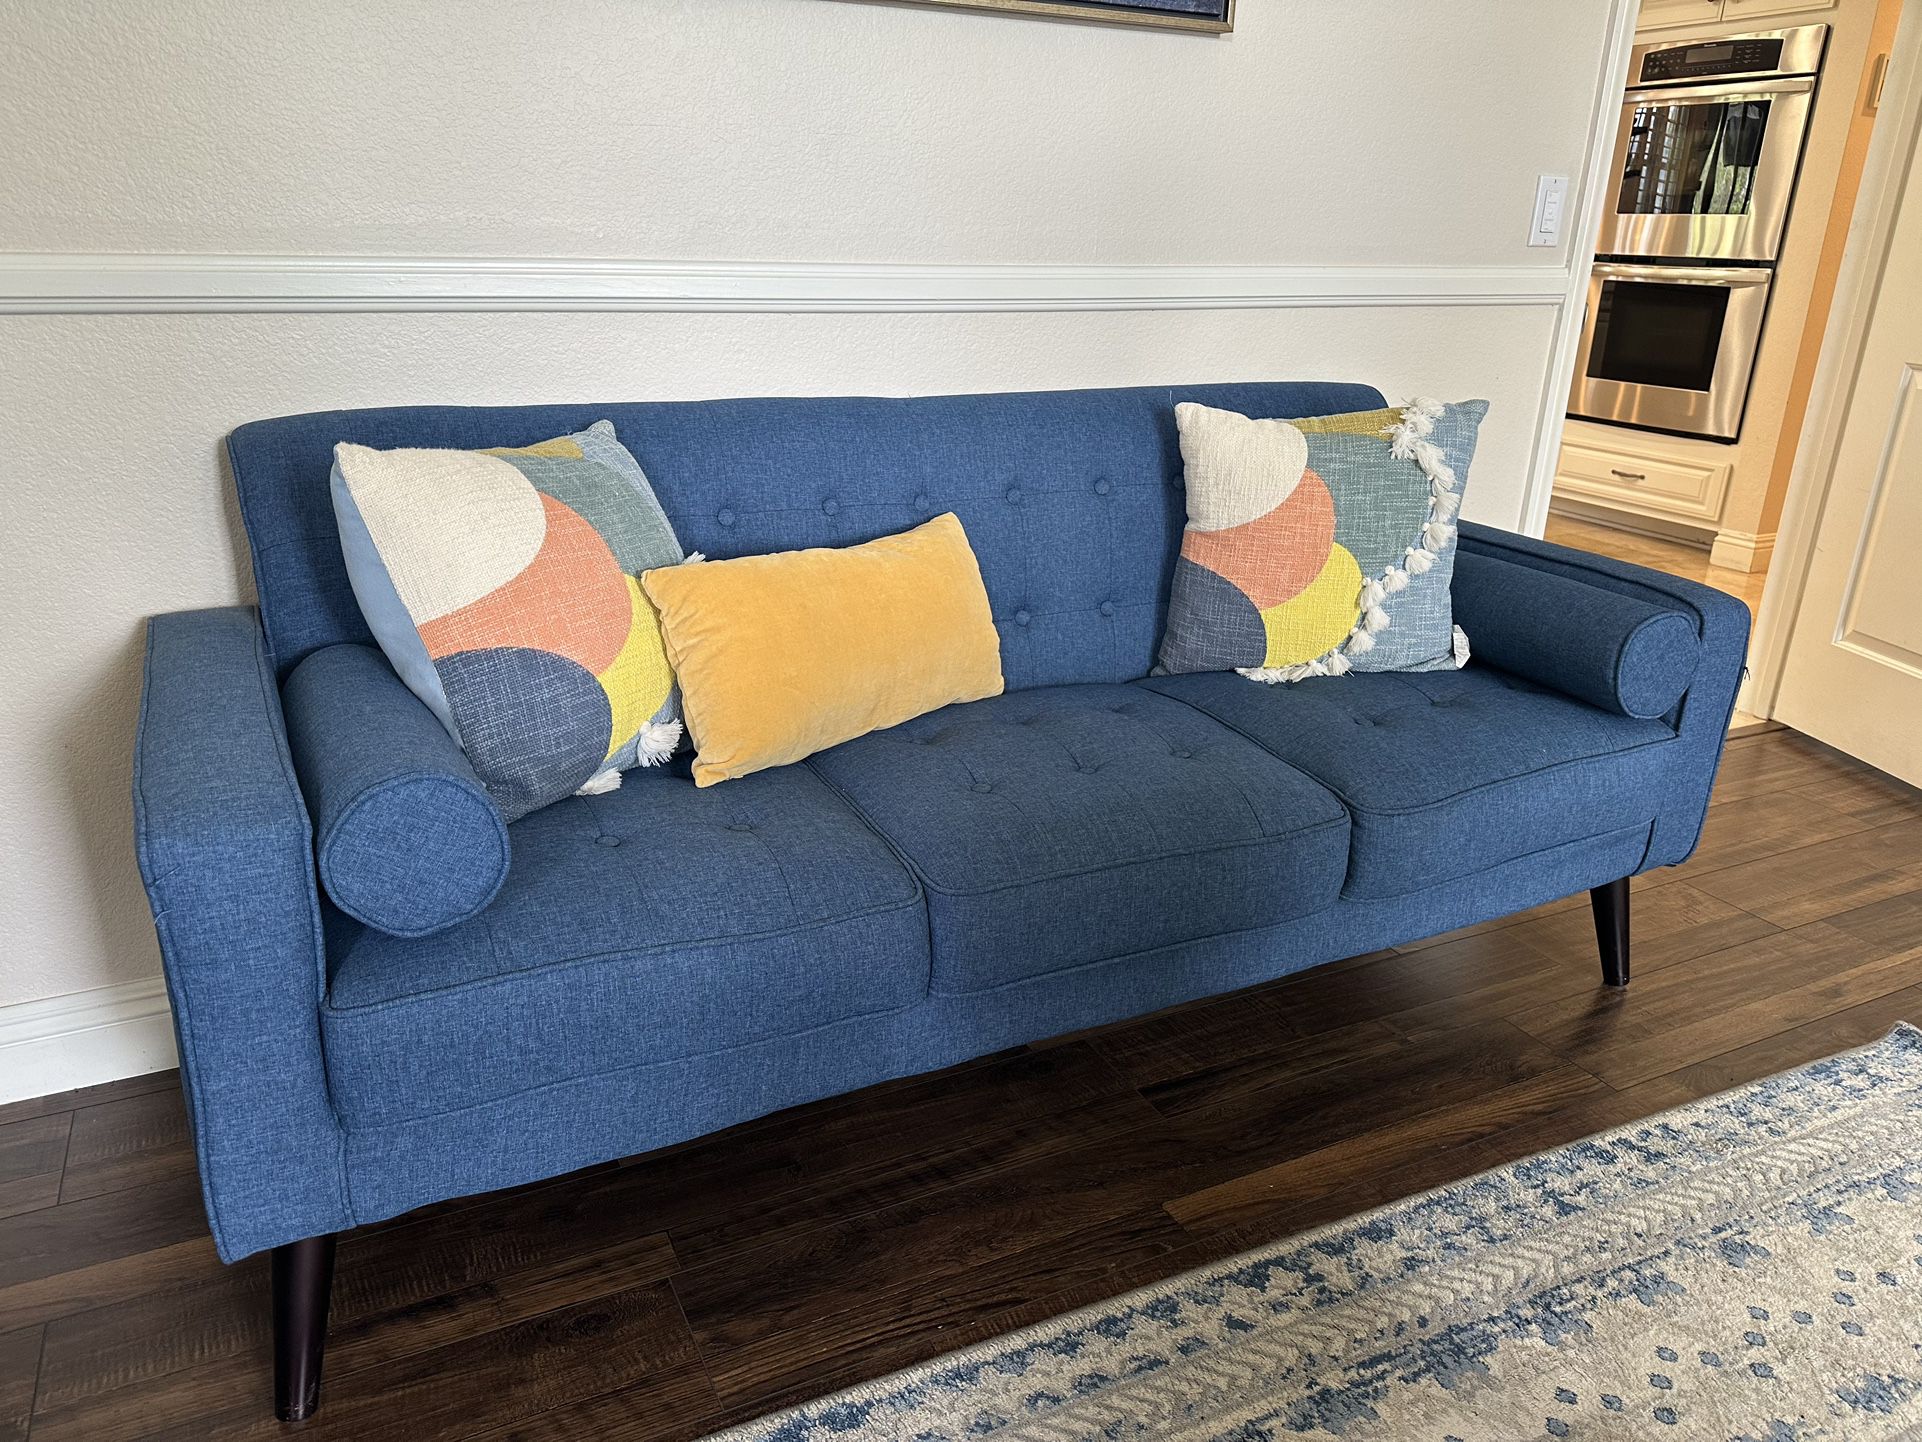 Small blue Couch 